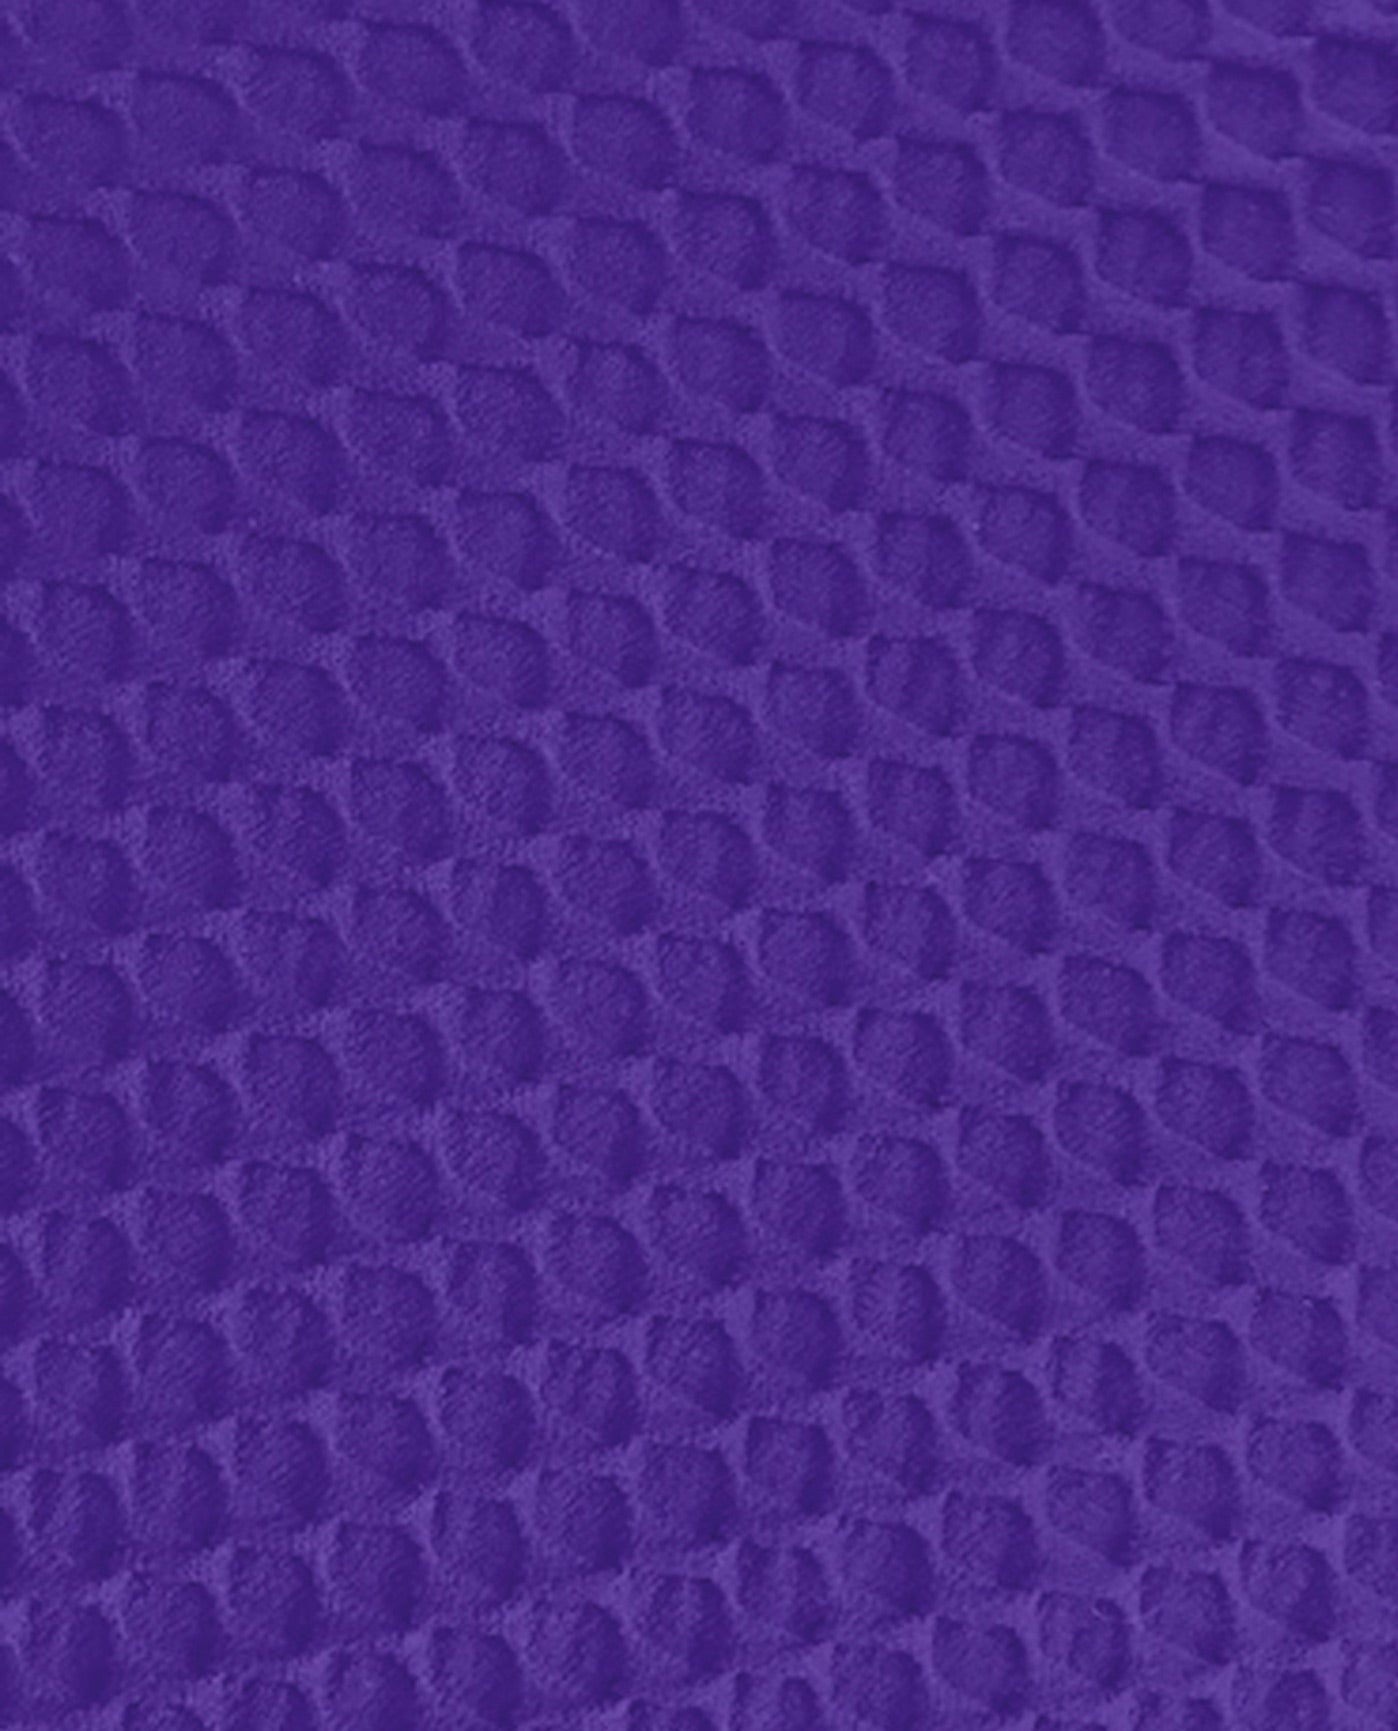 FABRIC SWATCH VIEW OF CHLORINE RESISTANT AQUAMORE SOLID TEXTURED SCOOP NECK PLUS SIZE LONG TORSO SWIMSUIT | 510 AQT TEXTURED PURPLE